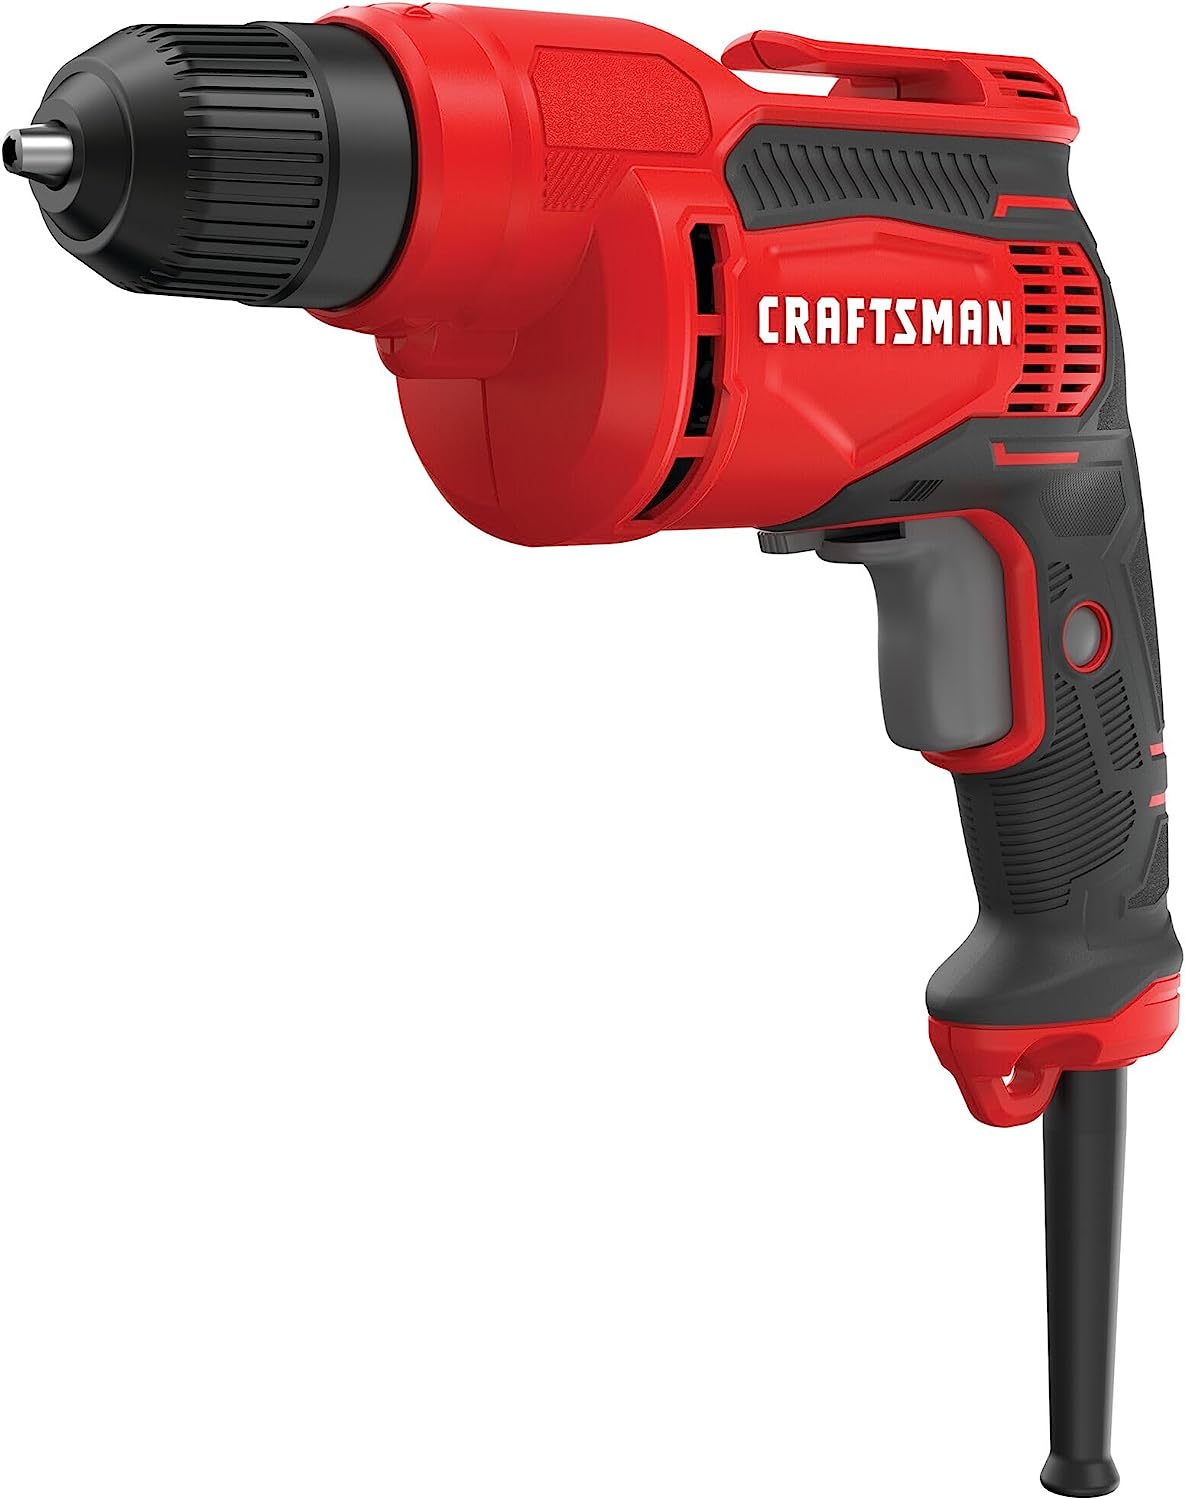 CRAFTSMAN Drill/Driver, 3/8 inch, 7 Amp, Corded (CMED731)